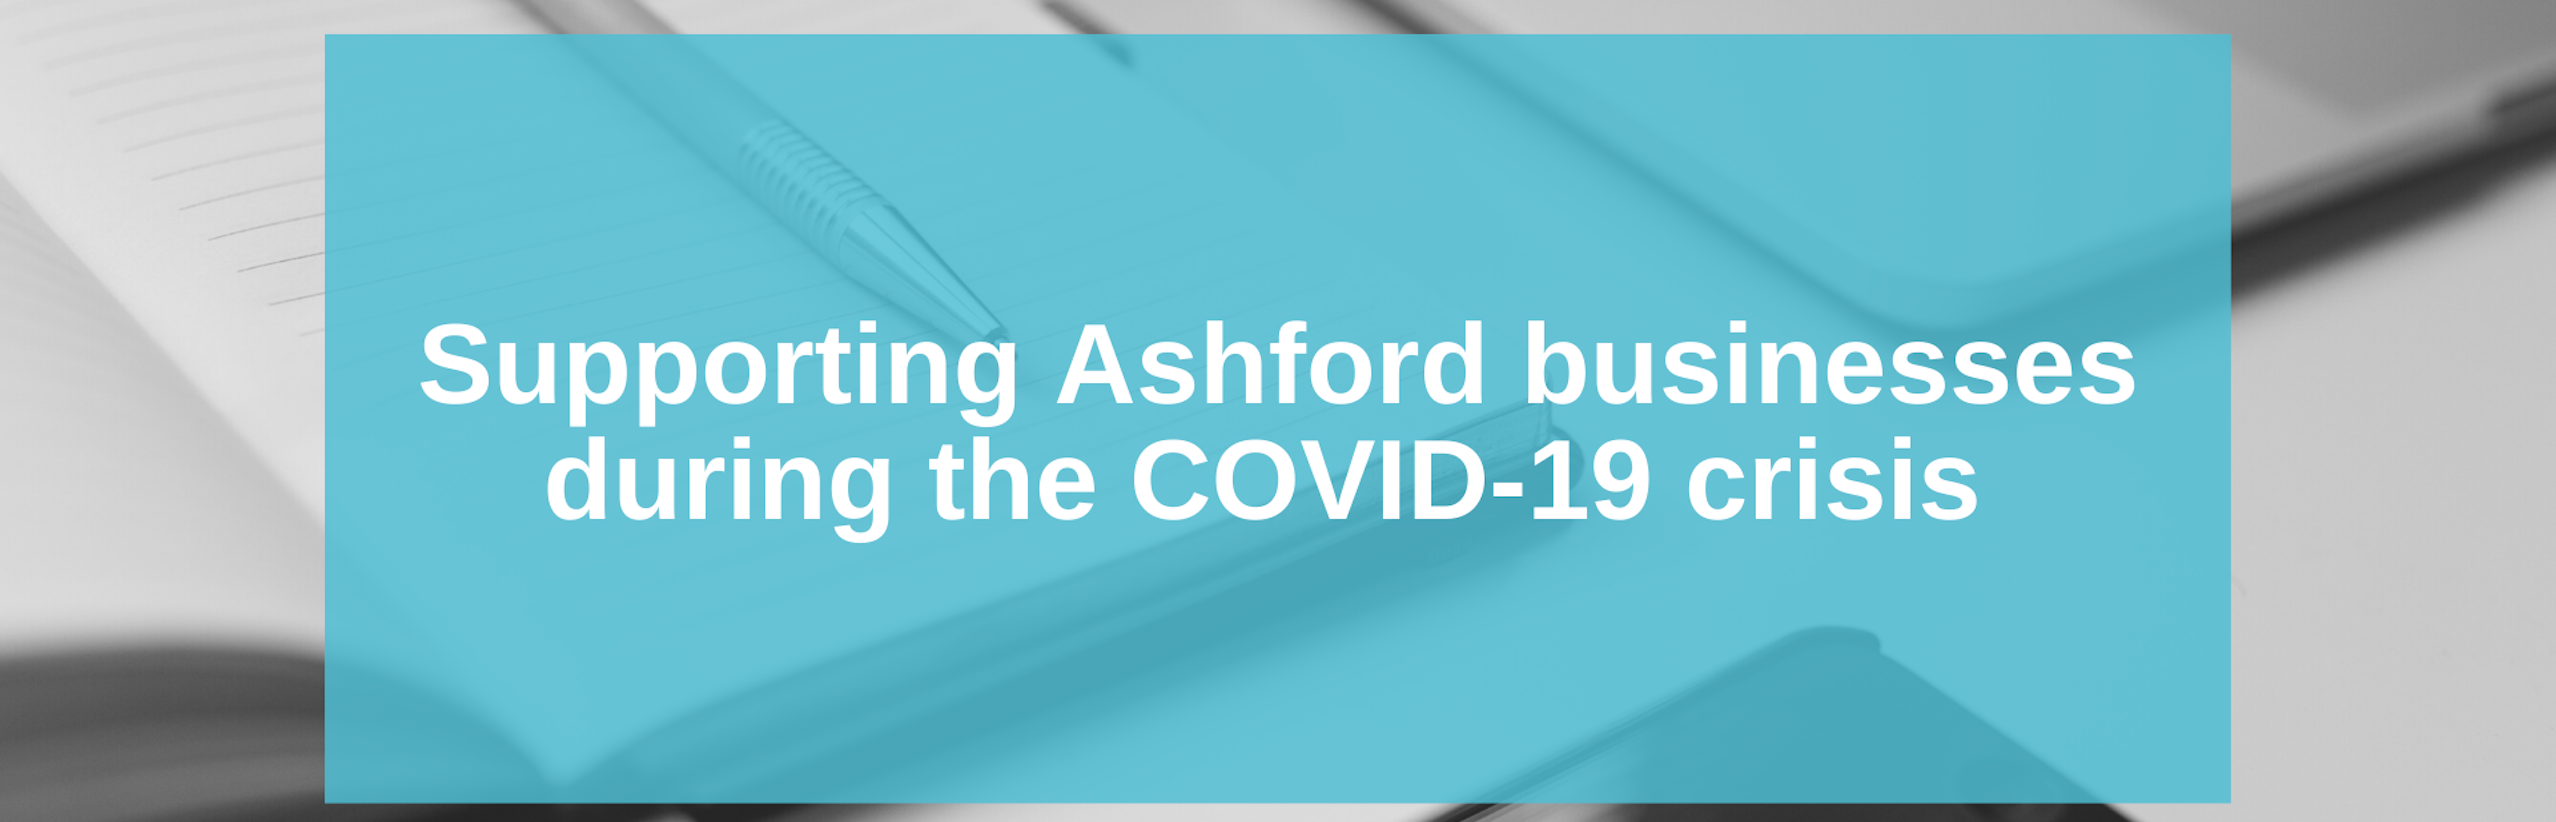 Supporting Ashford businesses during the COVID-19 crisis